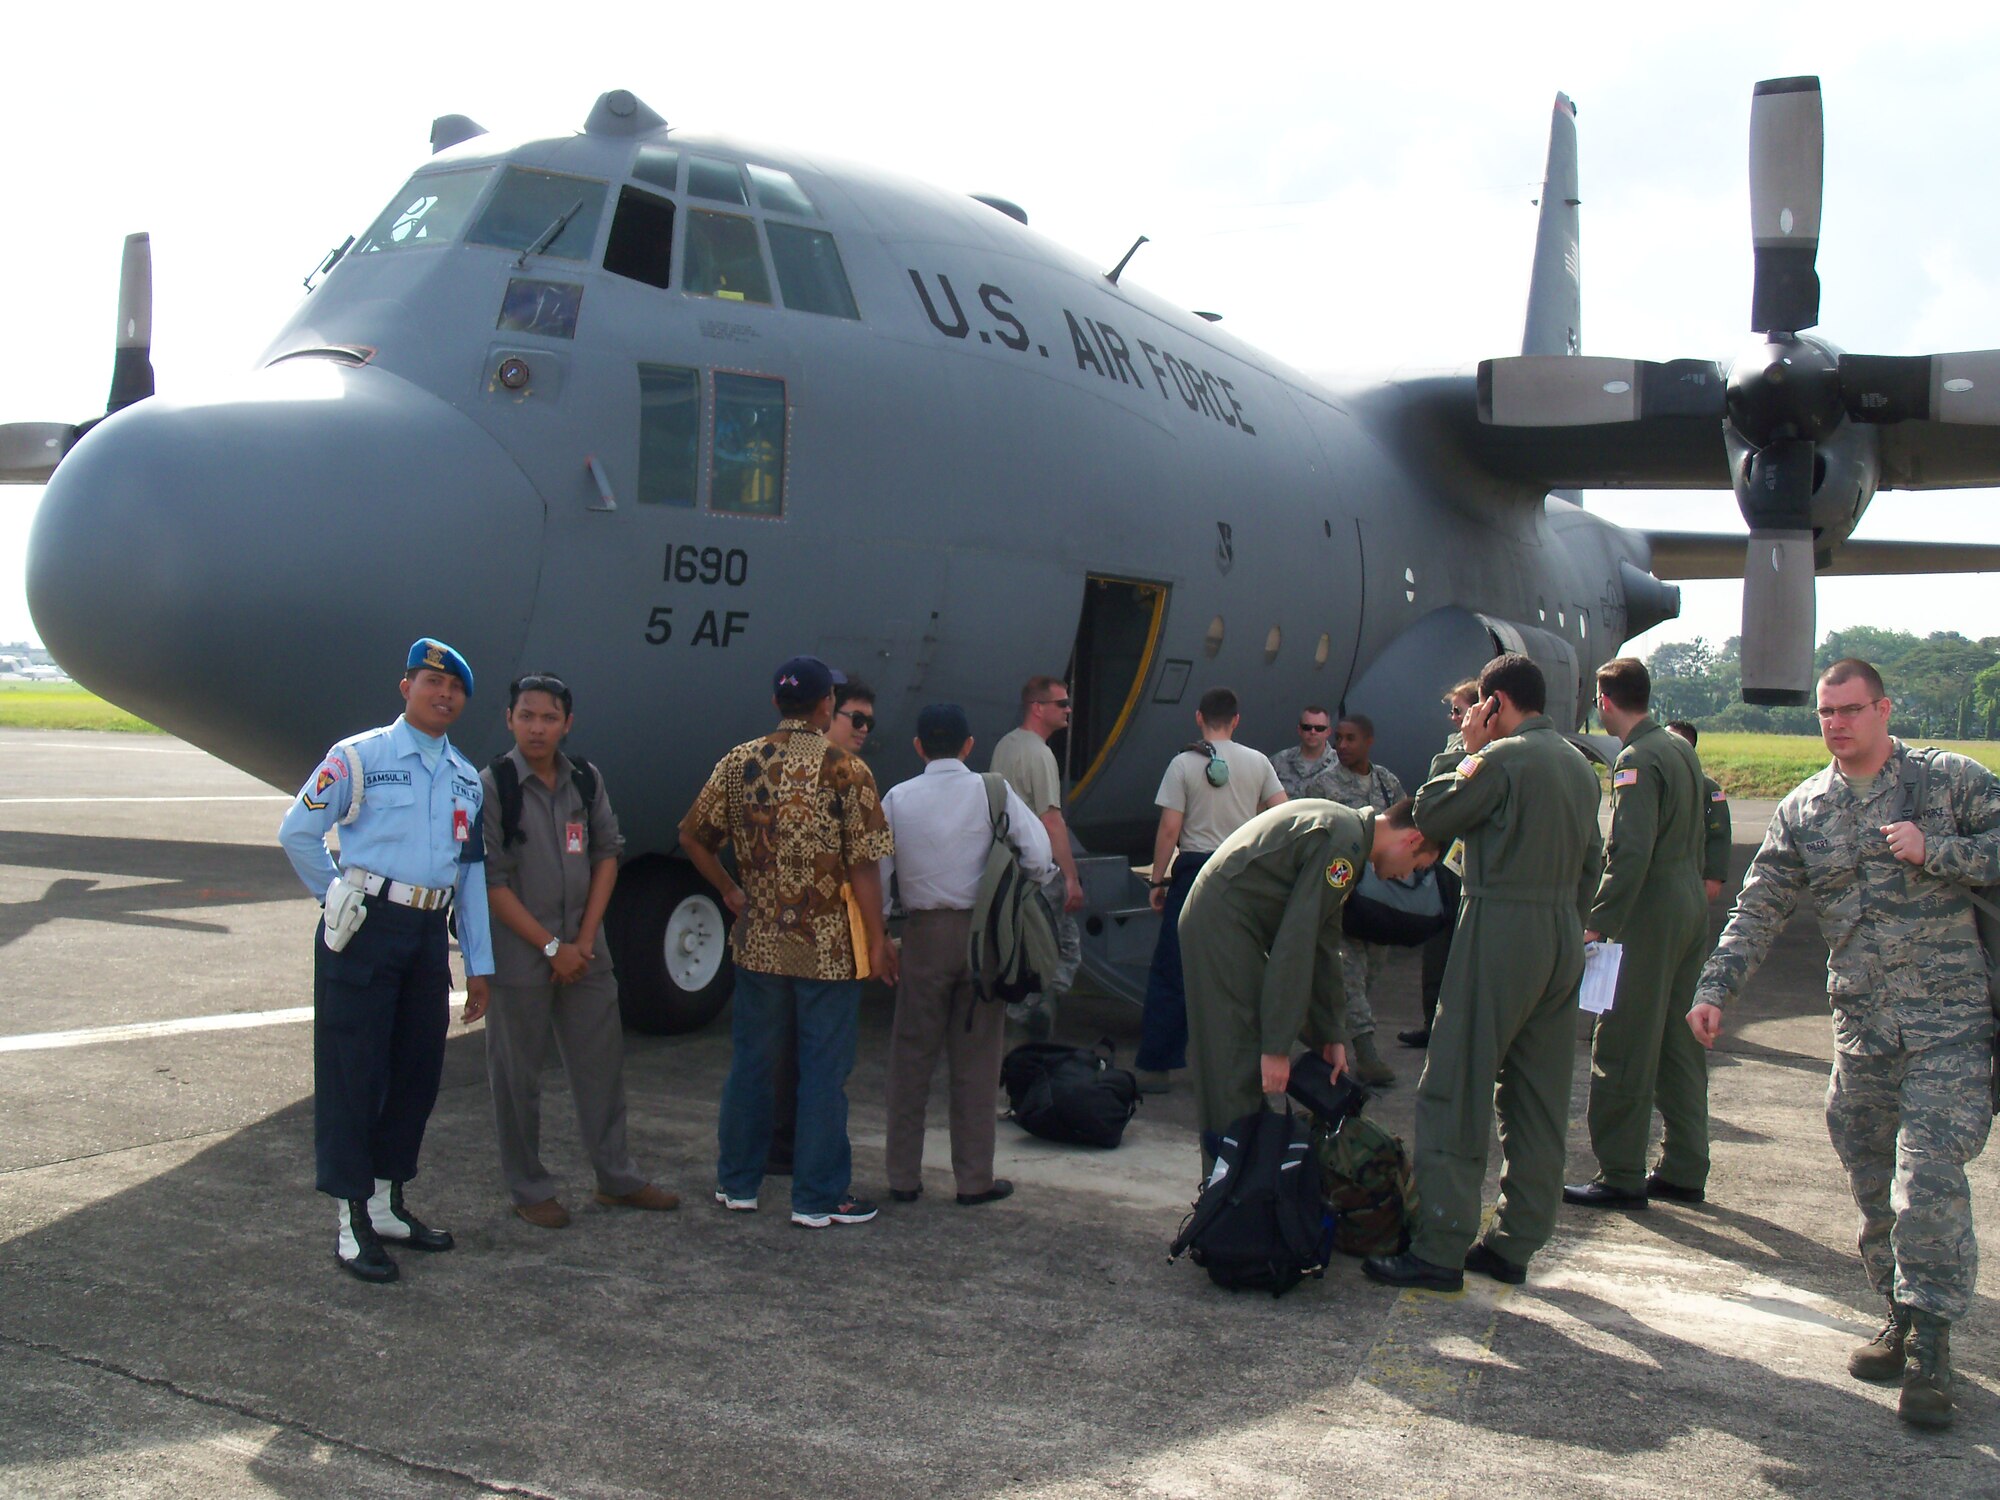 U.S. Air Force Airmen arrive at Halim Air Base, Indonesia, April 17, to participate in exercise Cope West 10 scheduled through April 23. Cope West is a Pacific Air Forces- sponsored bilateral tactical airlift exercise involving the U.S. and Indonesian Air Forces.  The exercise is designed to advance interoperability between the U.S. and Indonesian Air Forces, and promote cooperation and unity of purpose. (U.S. Air Force photo/ Lt. John Harden) 